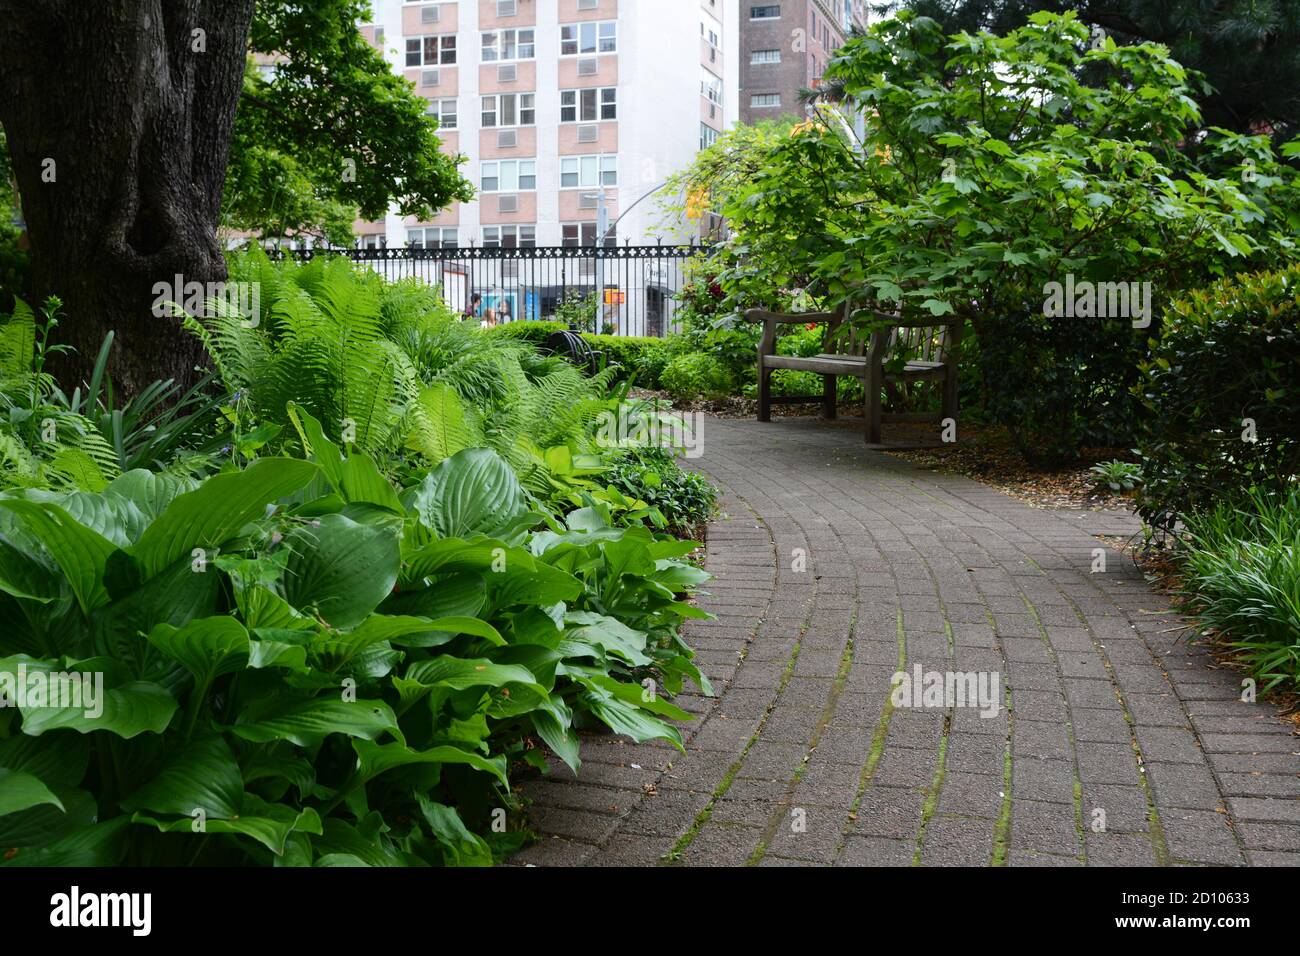 NEW YORK, USA - MAY 10, 2019: Pathway in Jefferson Market Garden, New York on May 10, 2019. Lush ferns, hostas and shrubbery grown in the urban garden Stock Photo